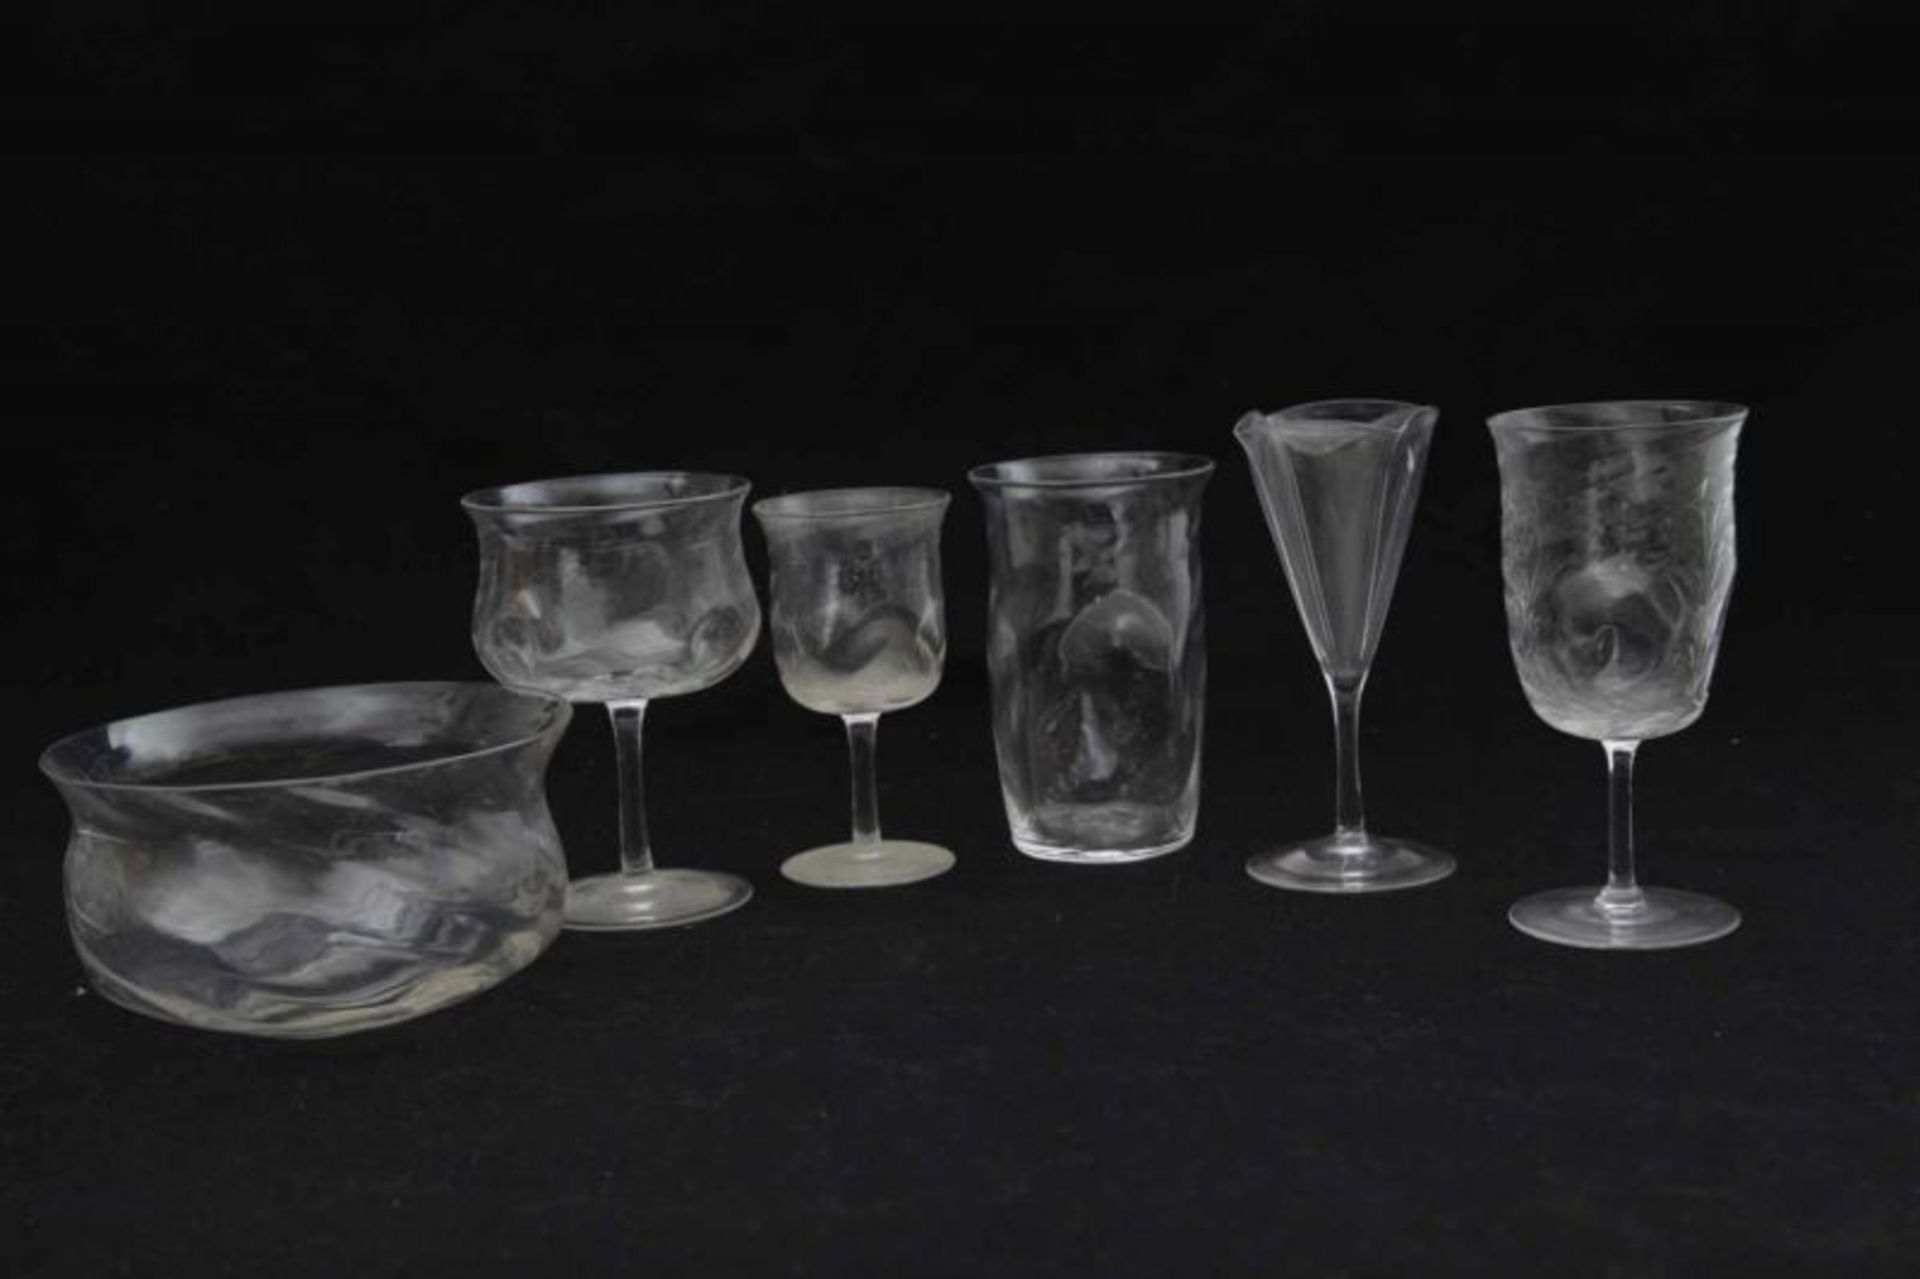 E. Bakalowits & Söhne, Vienna (attributed) A glass finger bowl, a water glass and three stemmed